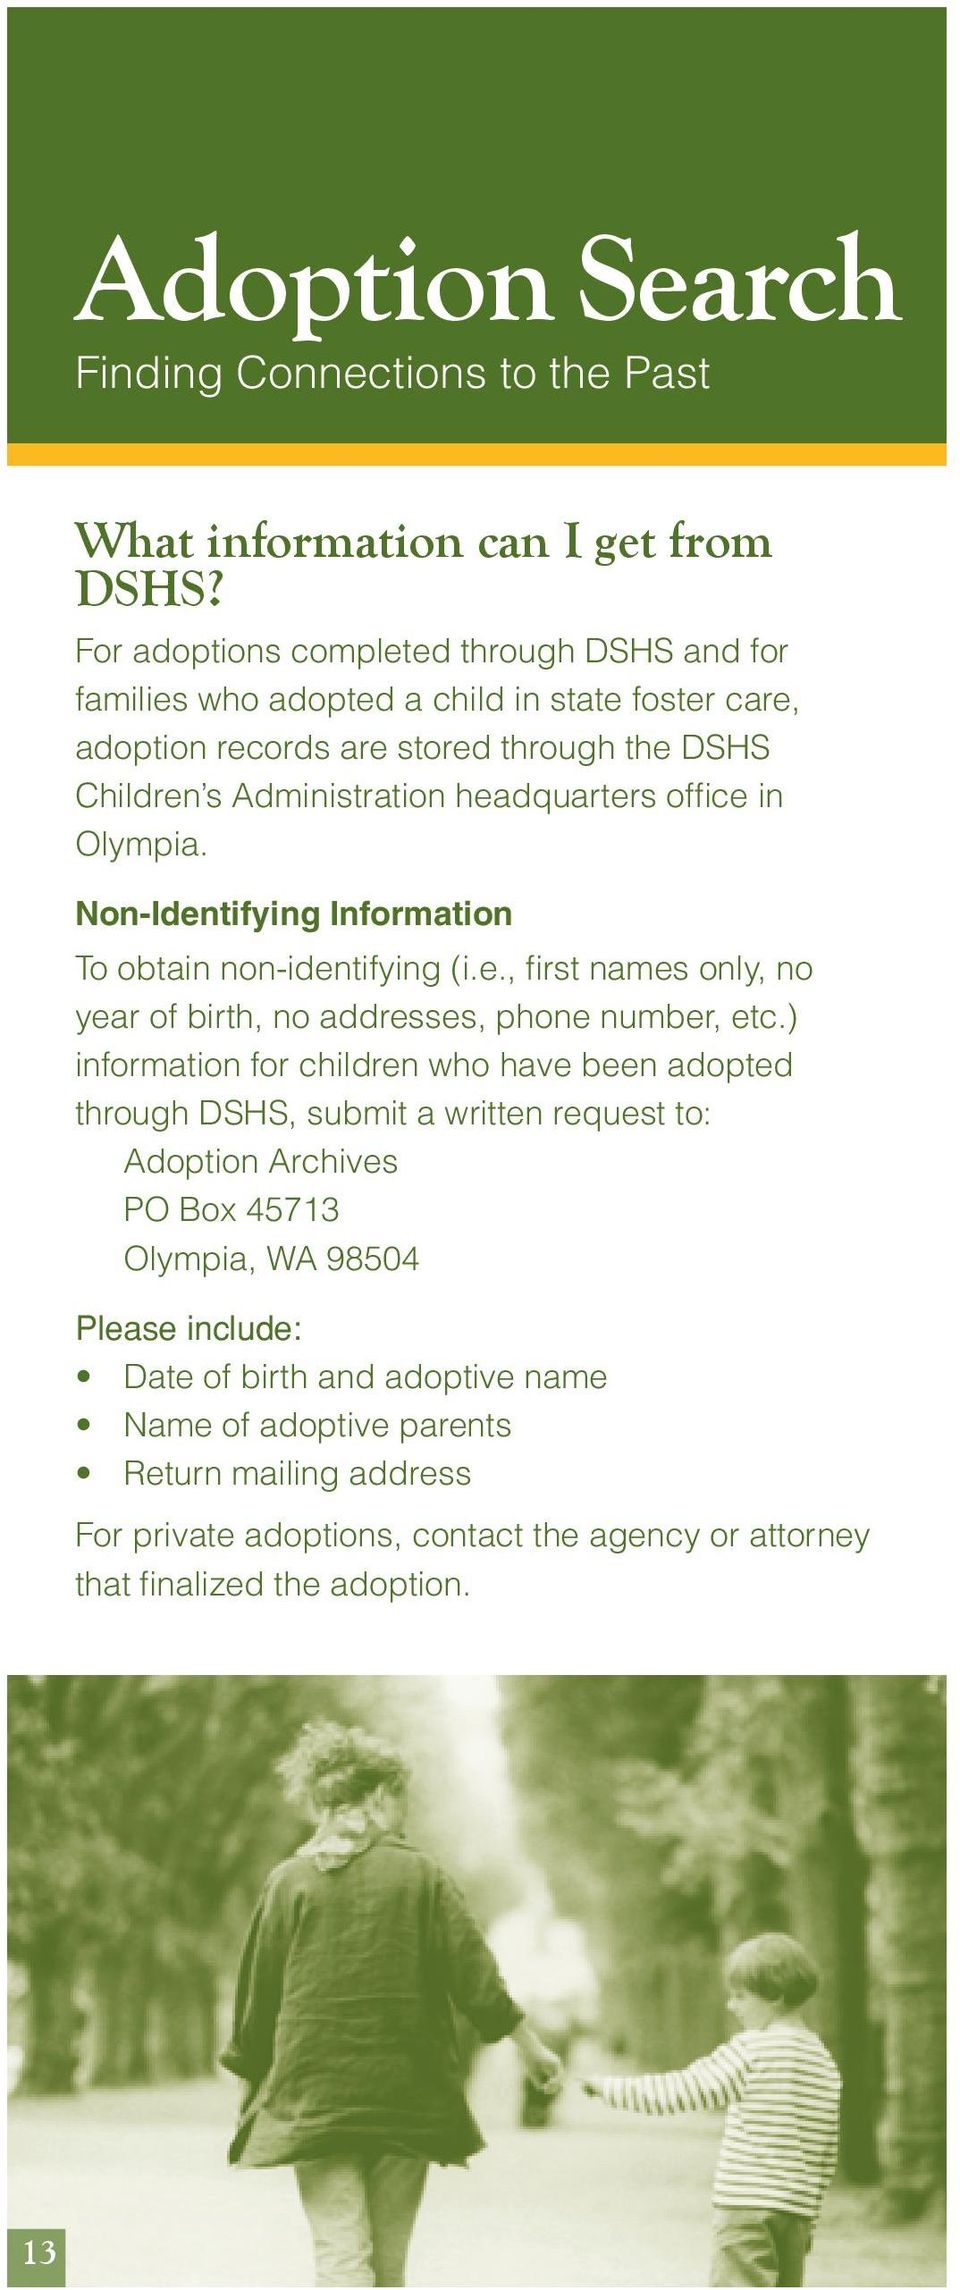 office in Olympia. Non-Identifying Information To obtain non-identifying (i.e., first names only, no year of birth, no addresses, phone number, etc.